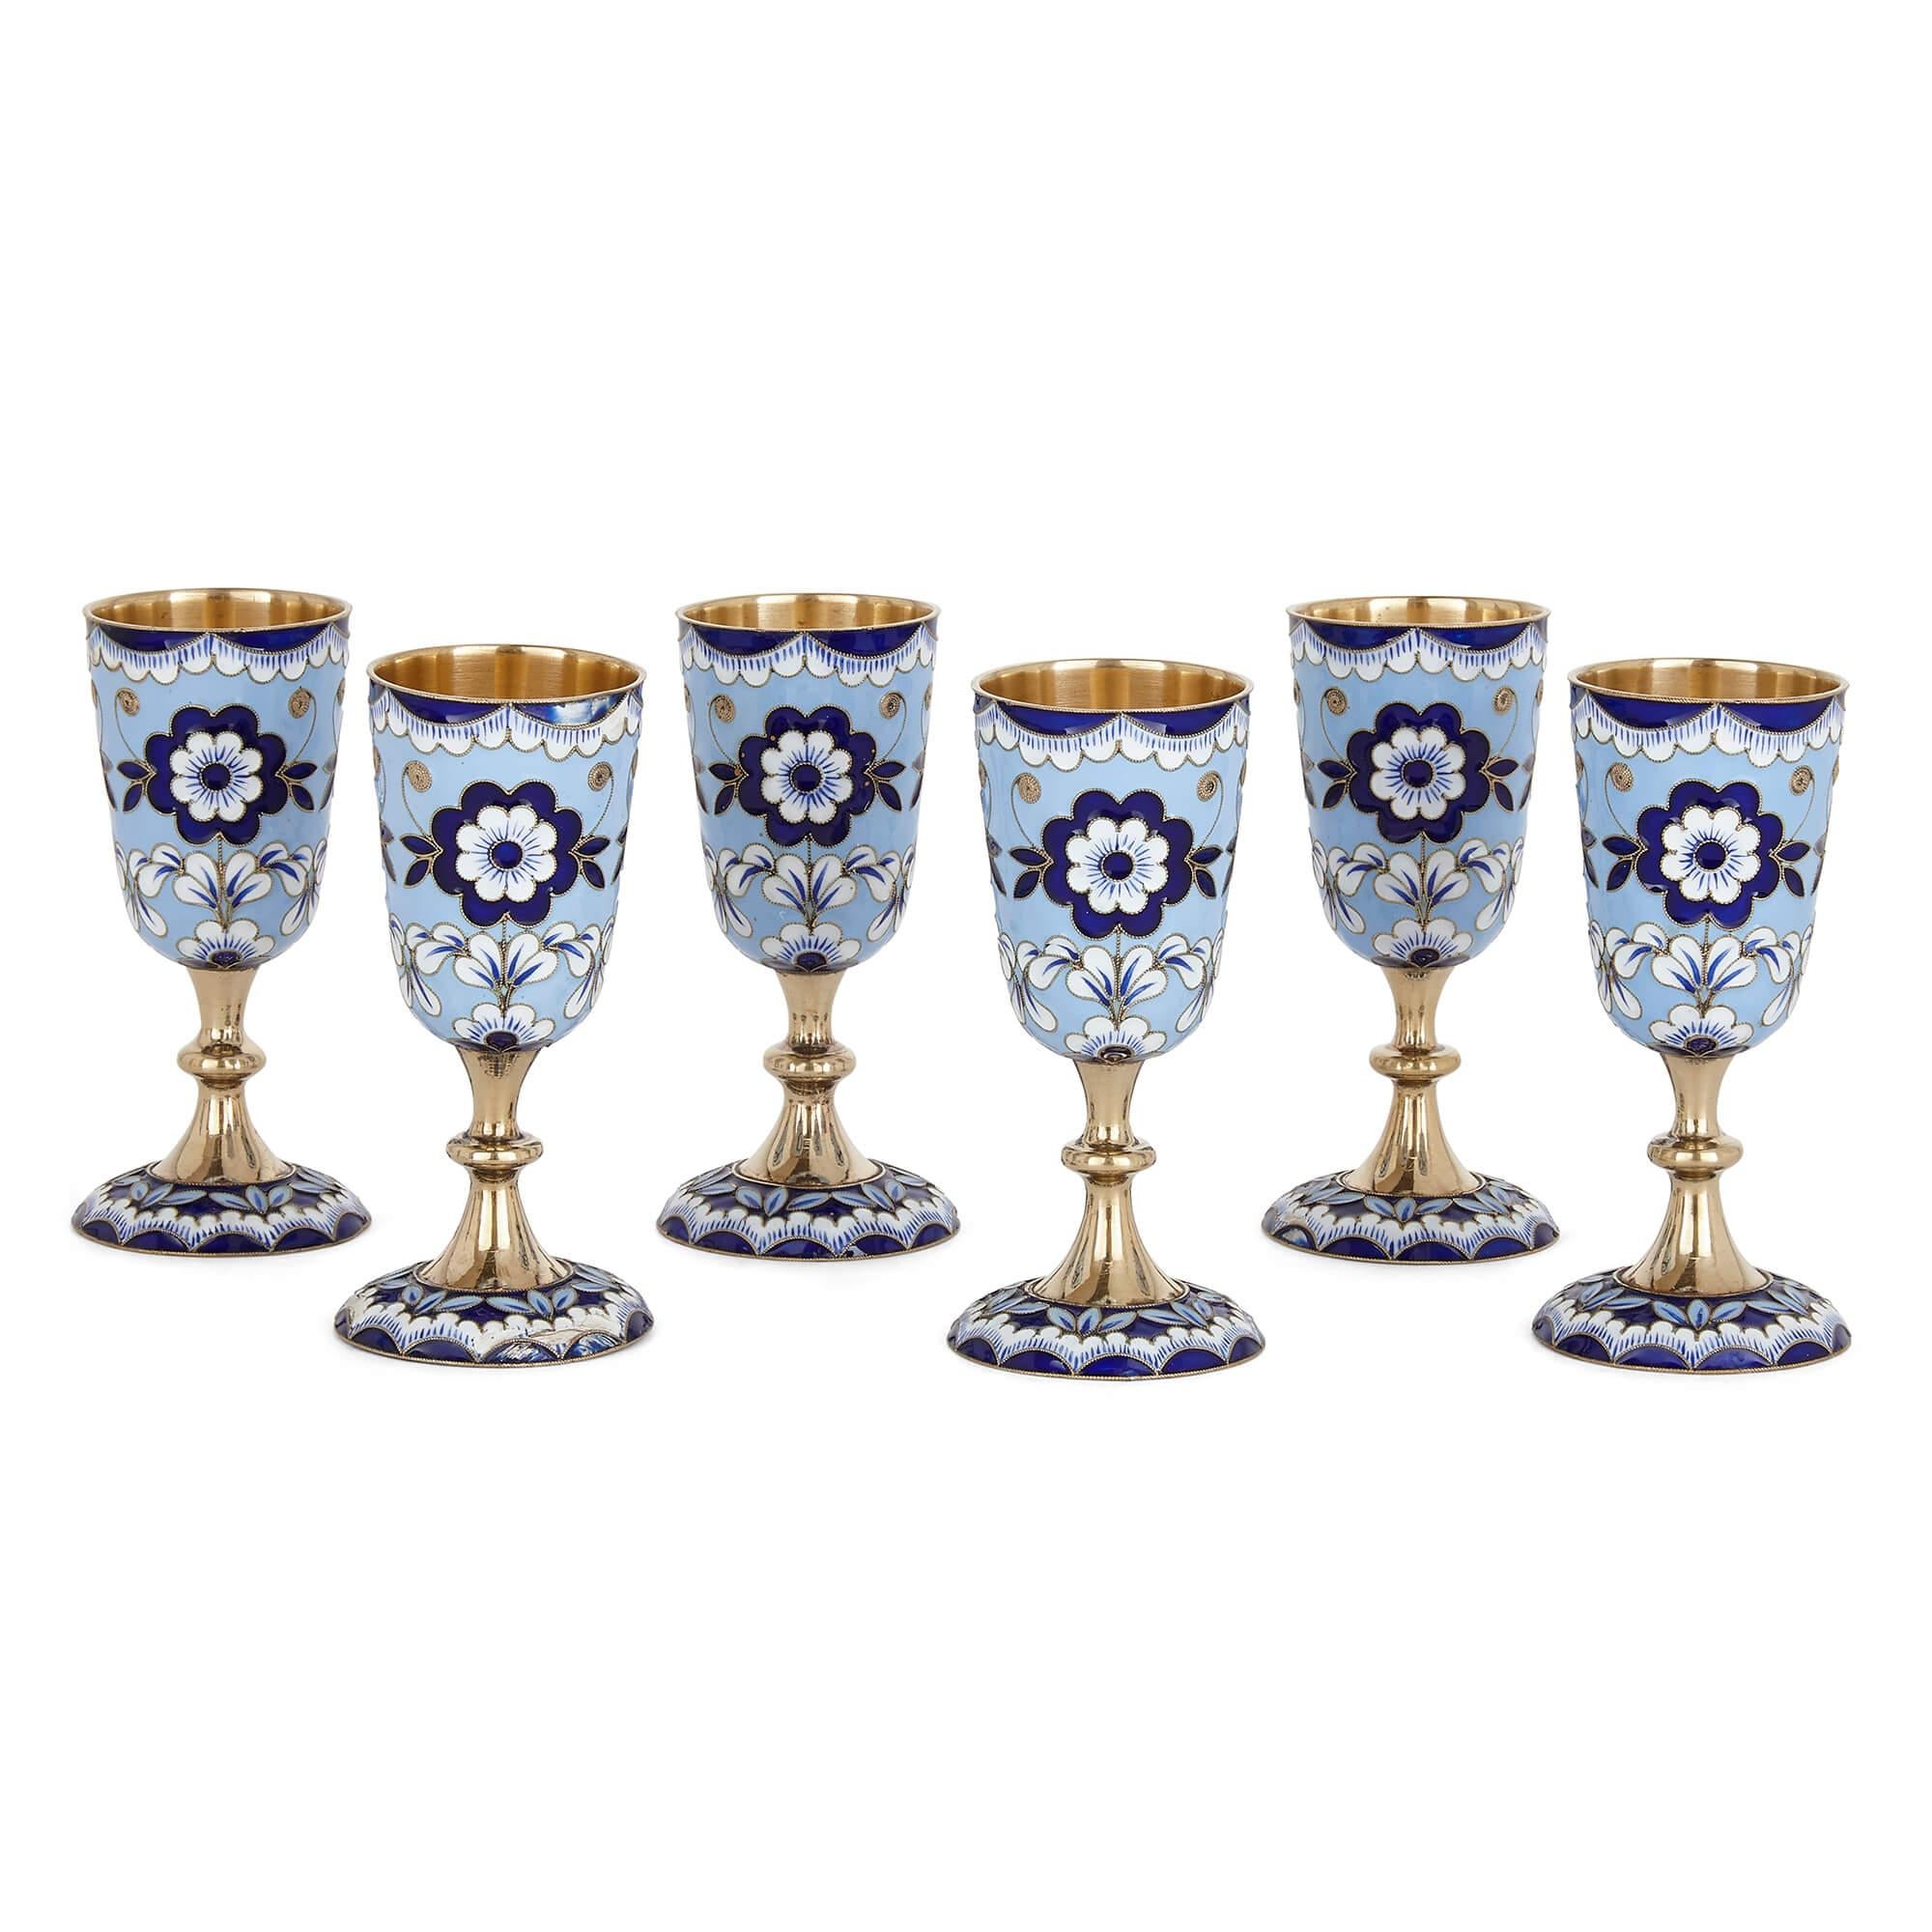 Russian vermeil and blue enamel vodka set
Russian, 20th Century
Decanter: Height 29cm, diameter 8cm
Cup: Height 8.5cm, diameter 4cm

This Russian drinking set was crafted during the Soviet period from cloisonné enamel and vermeil. The set is